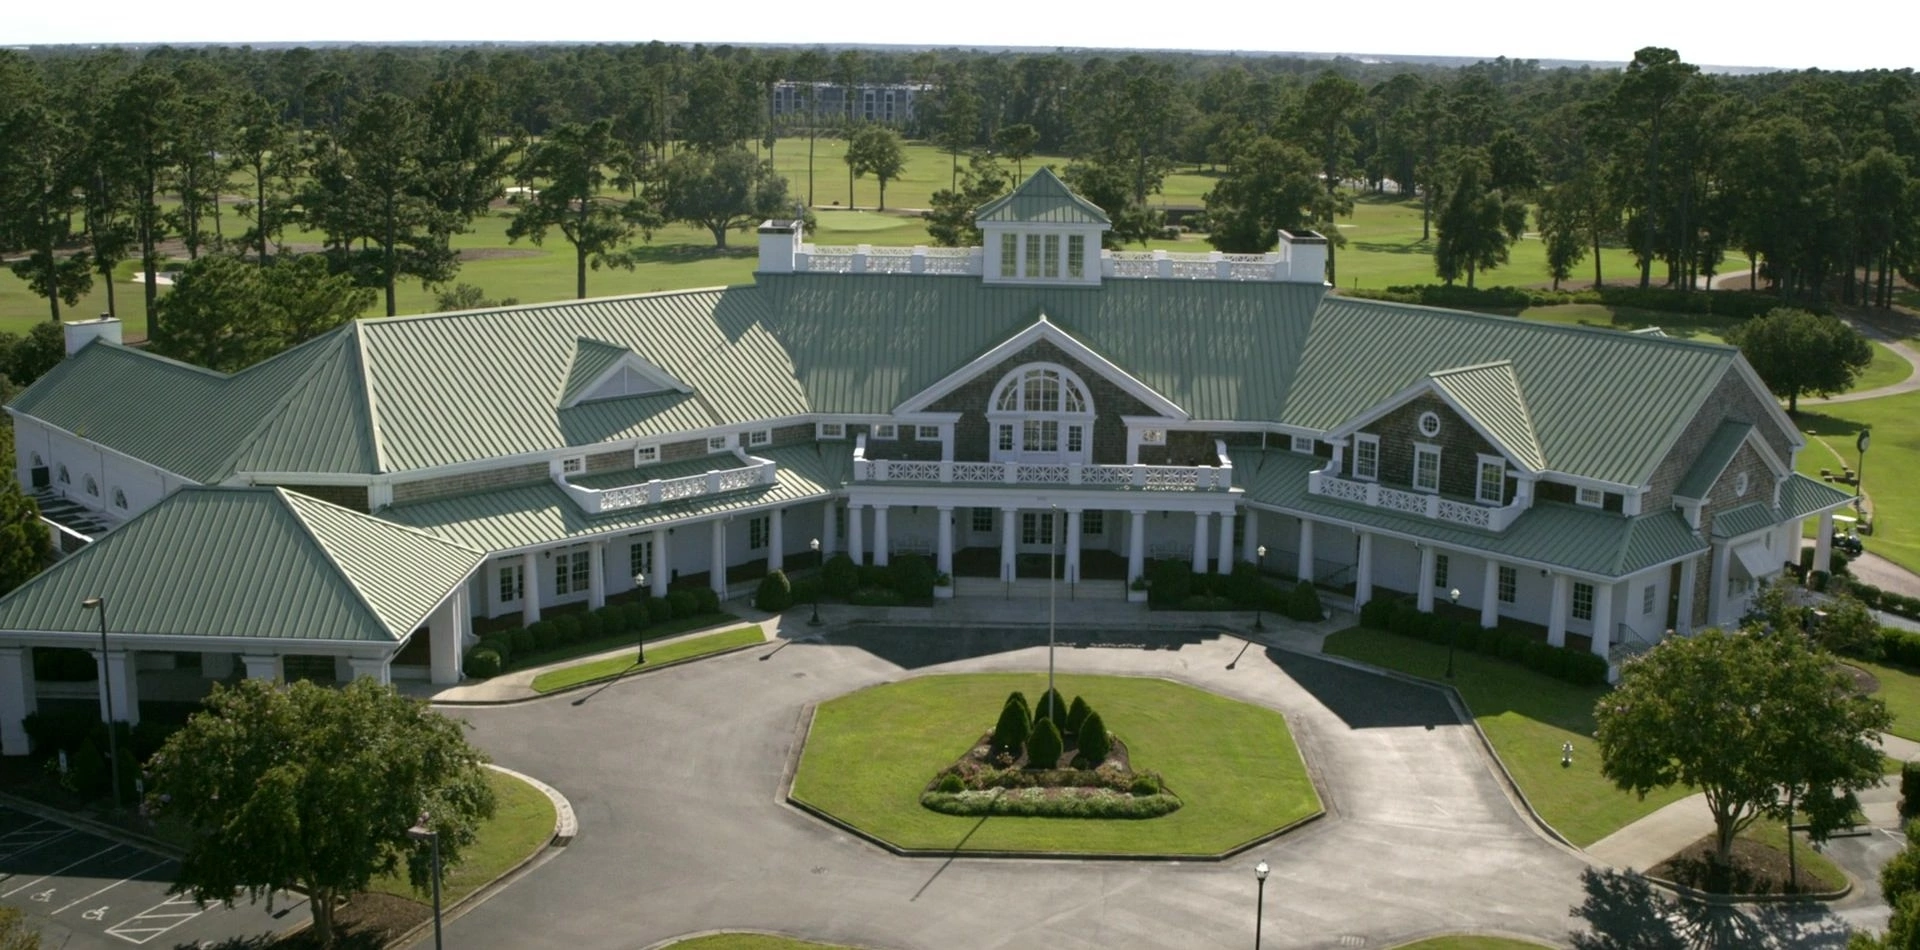 The Fear Cape Country Club